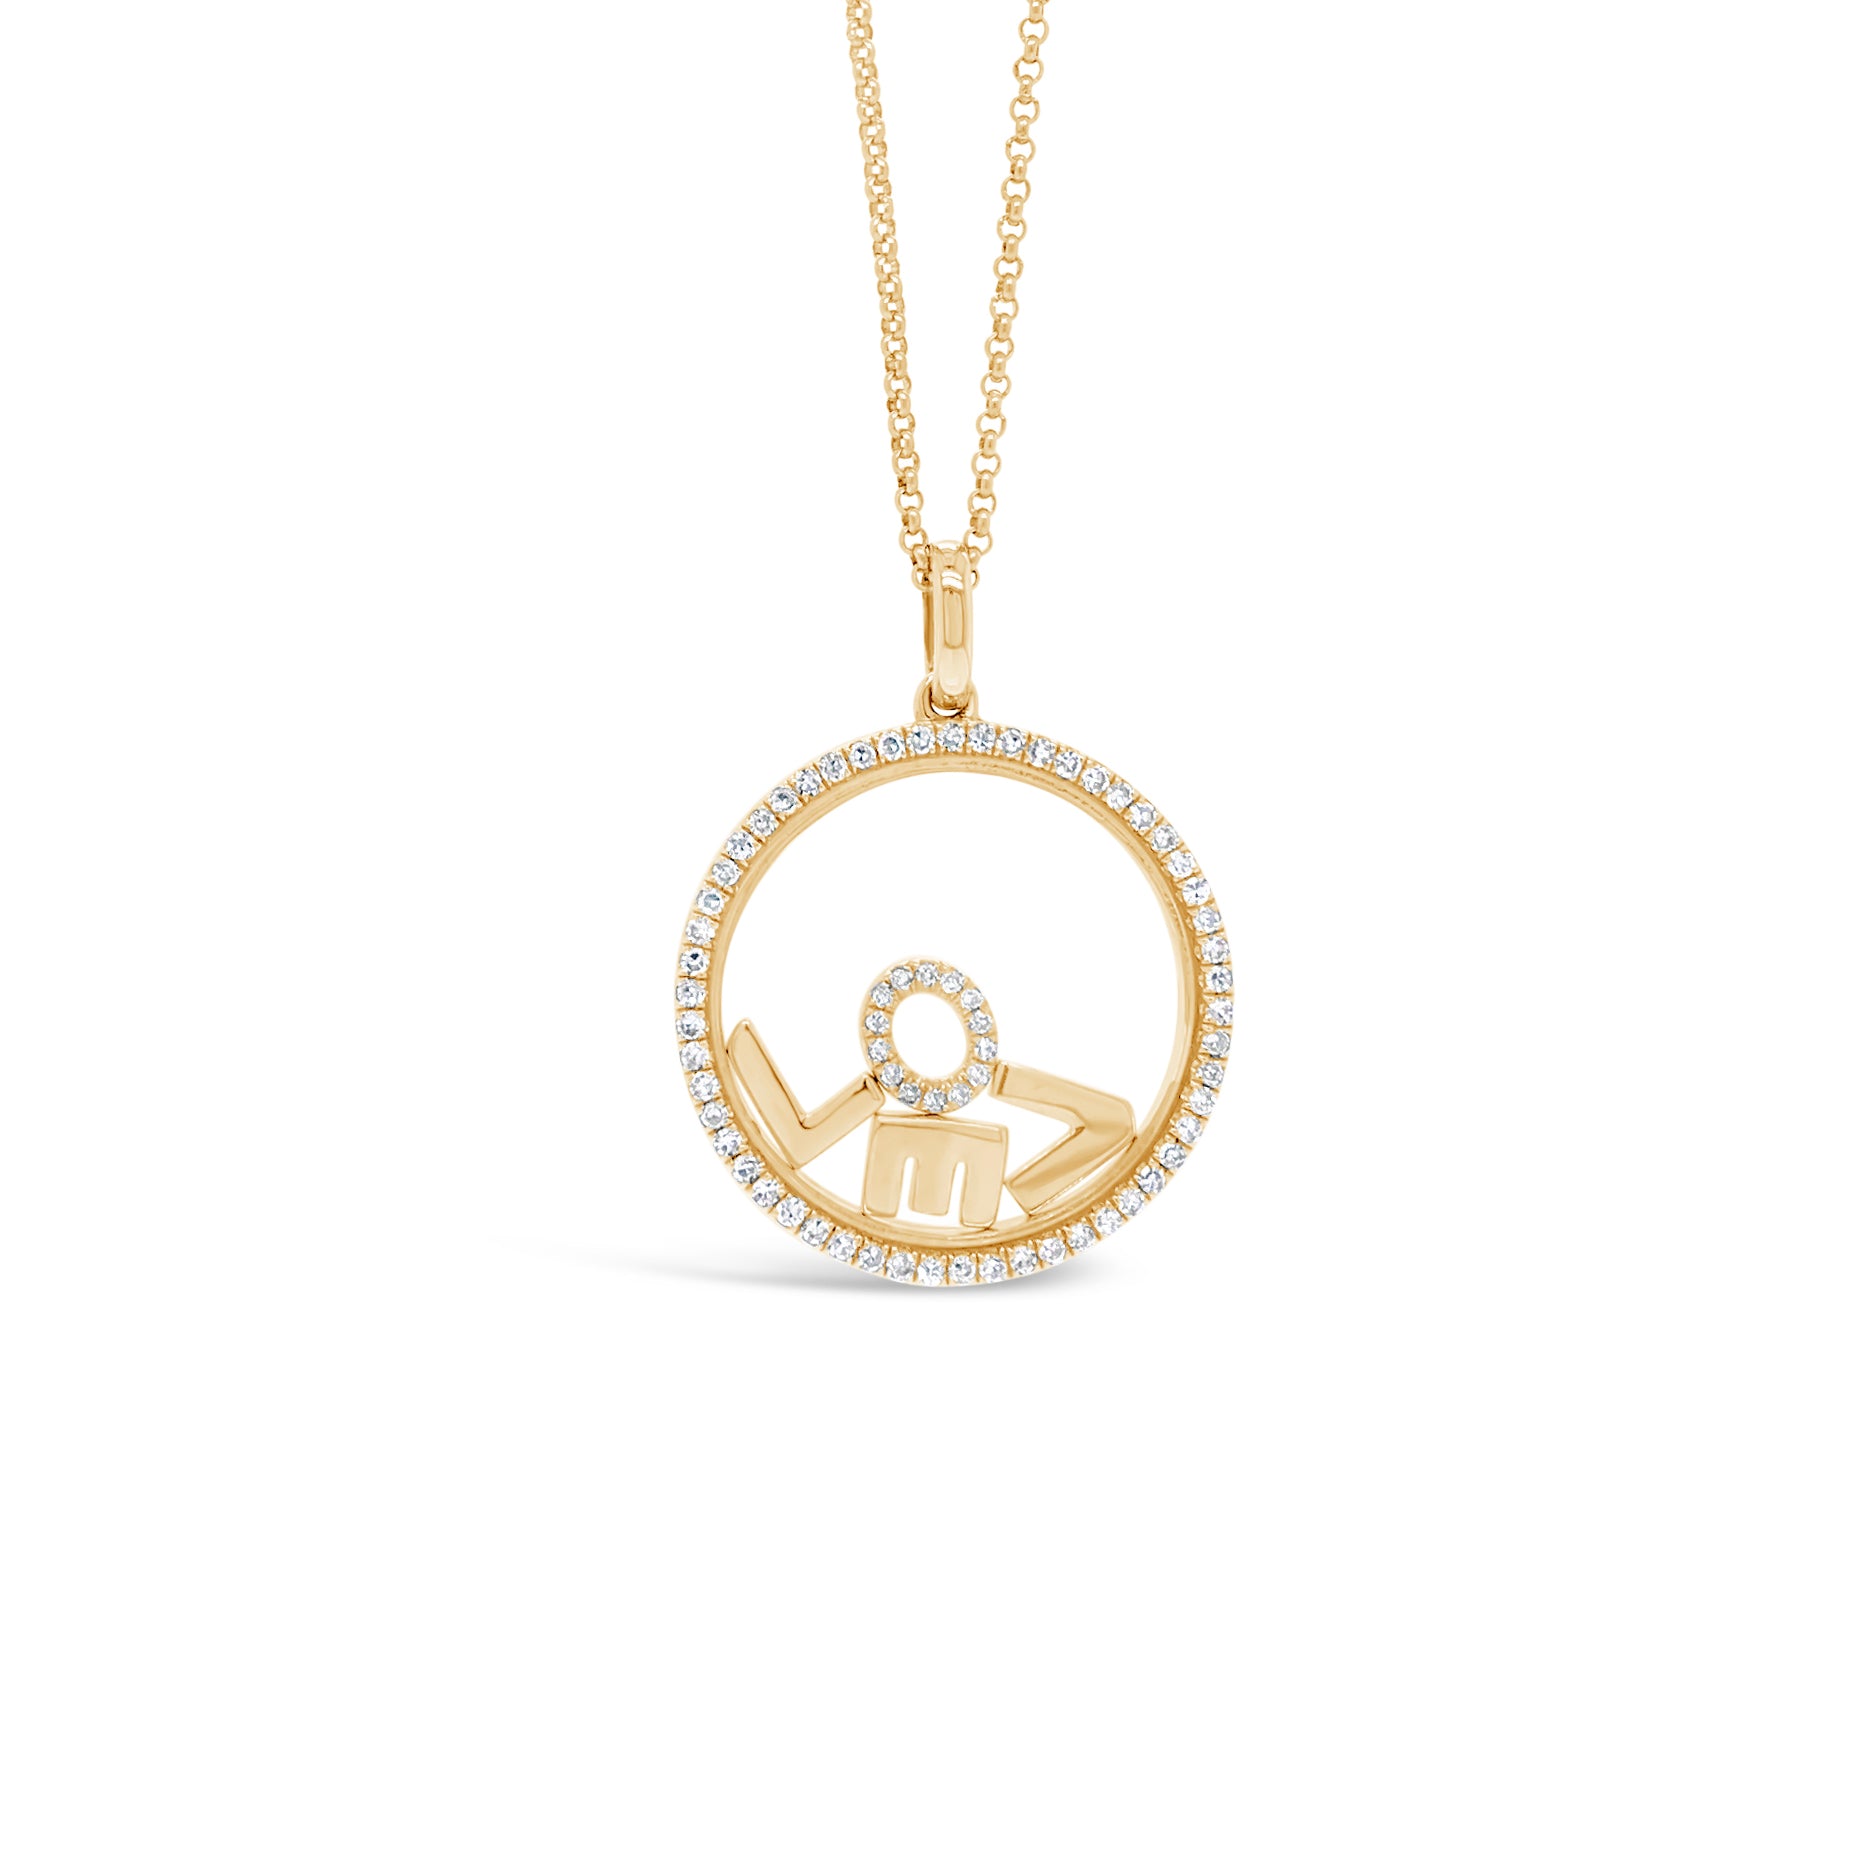 Diamond "Love" Pendant Necklace -14K yellow gold weighing 5.23 grams -68 round diamonds totaling 0.25 carats